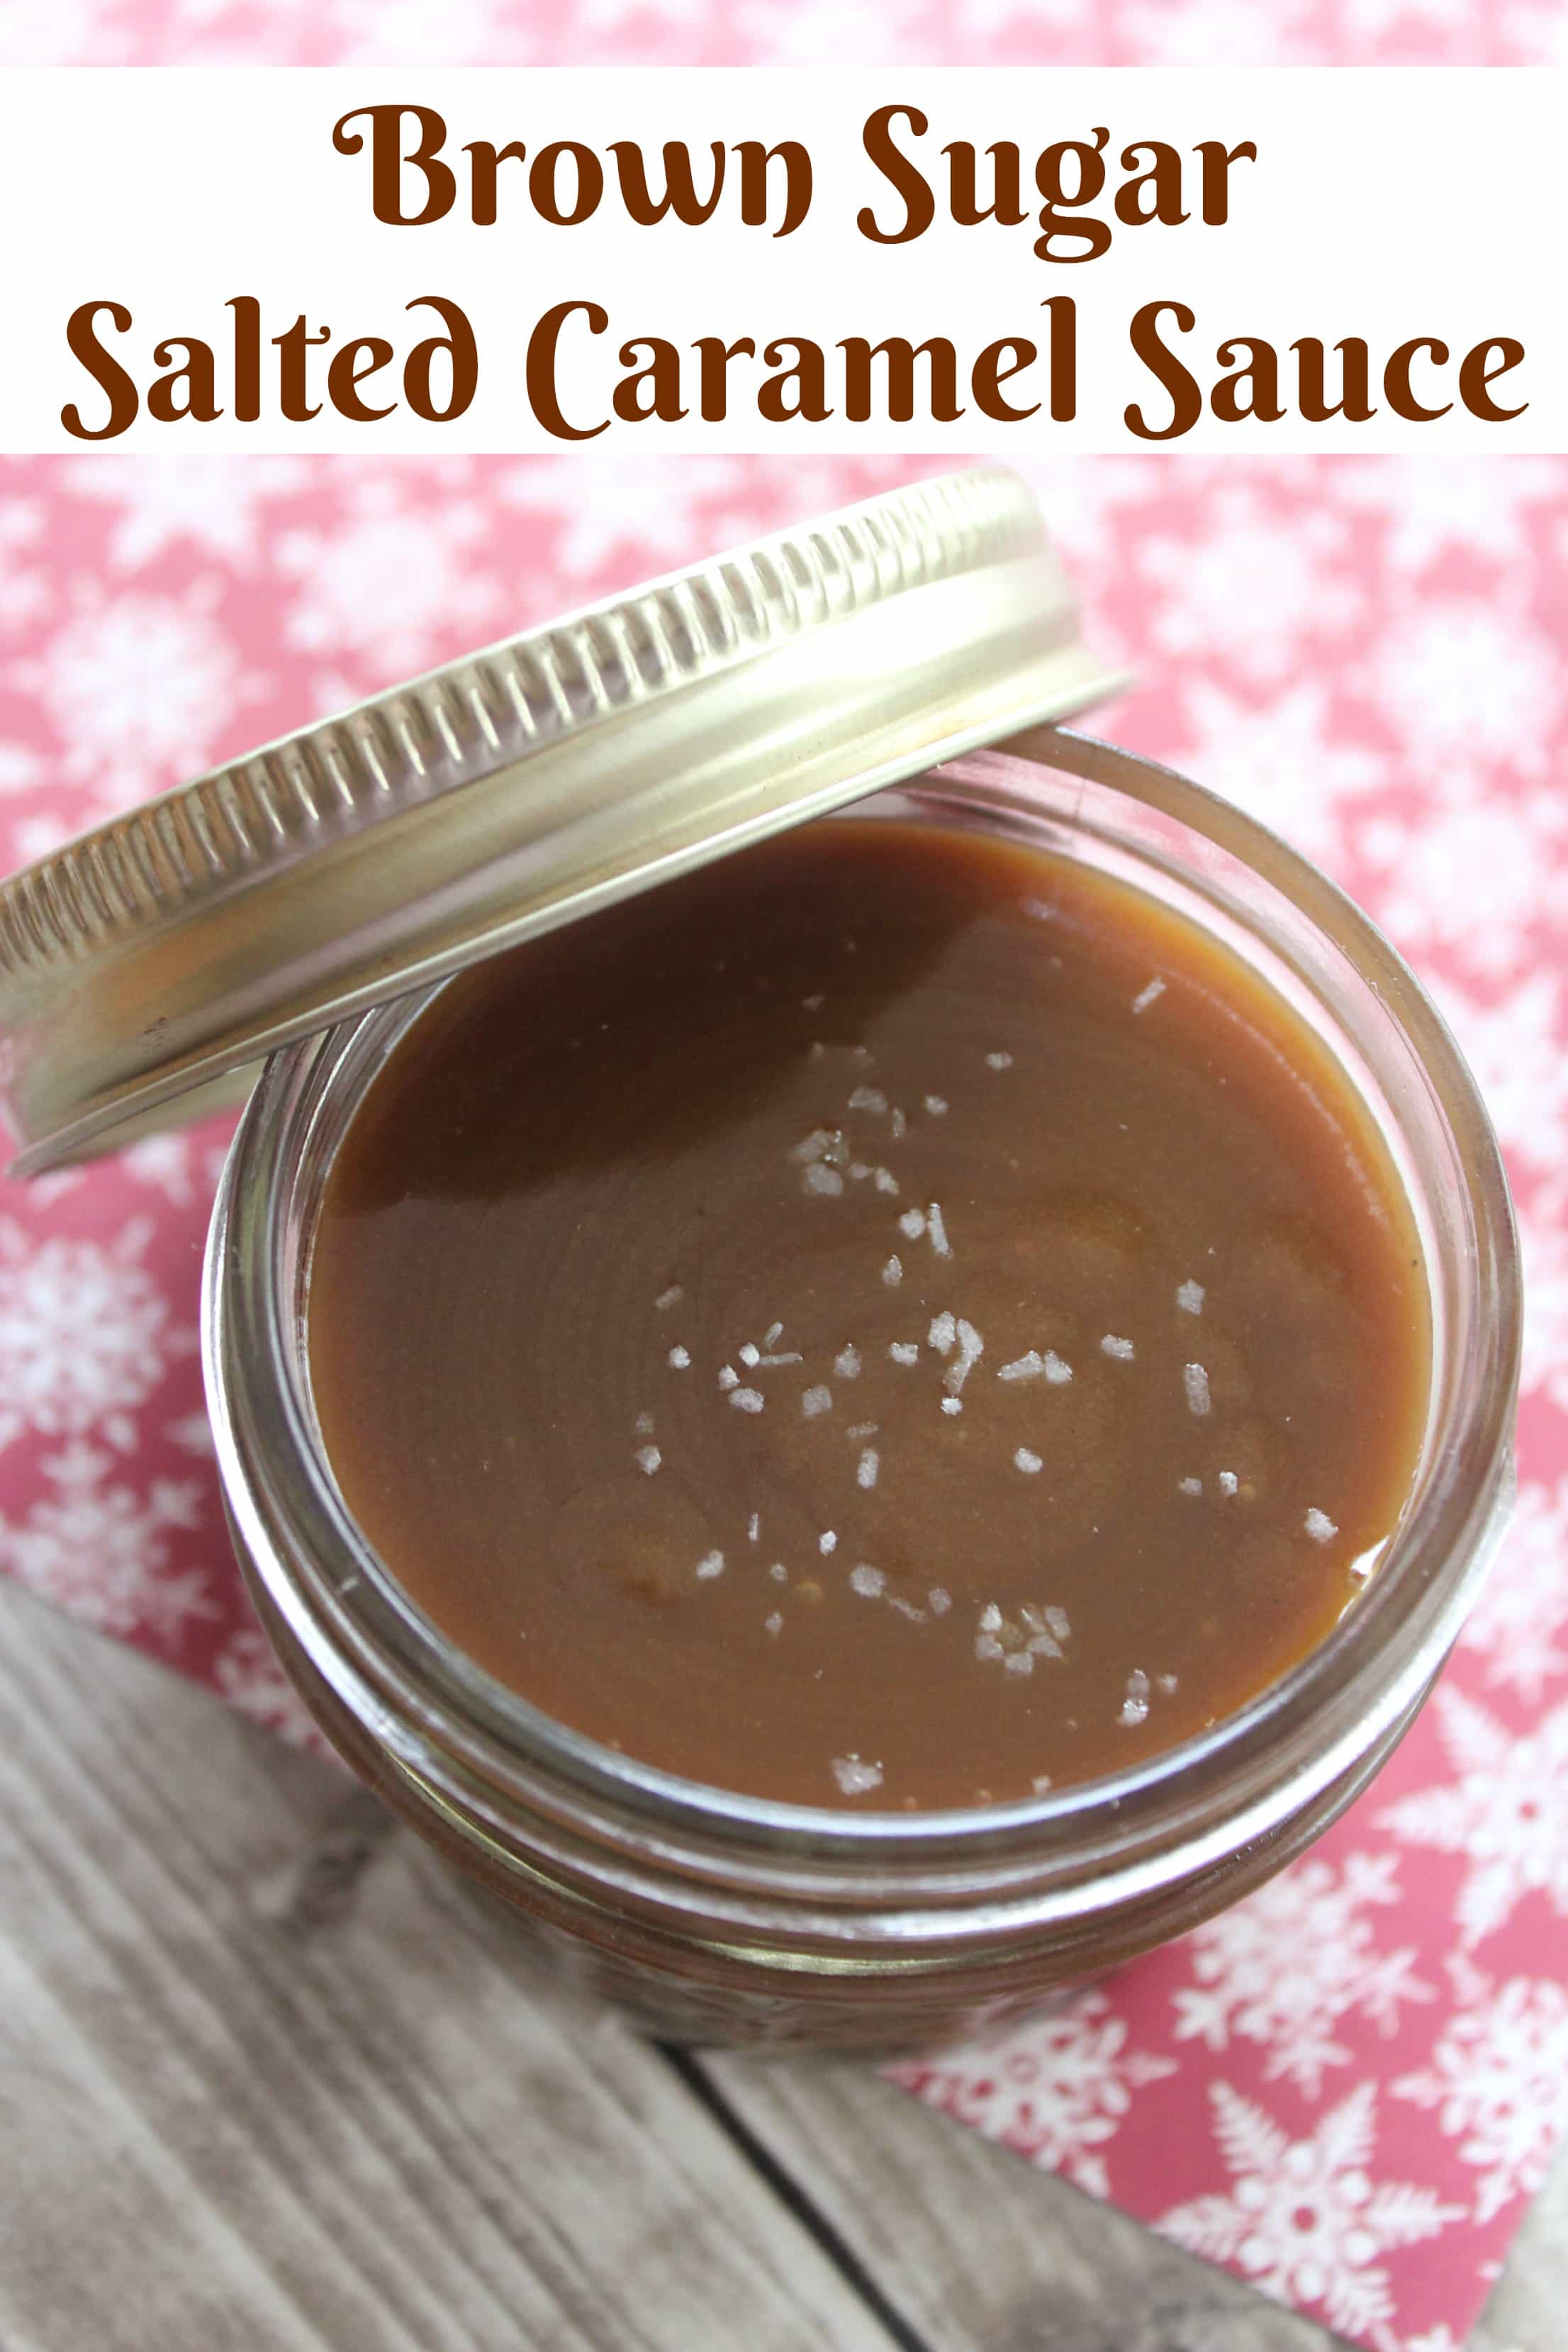 Make this easy Brown Sugar Salted Caramel Sauce with just a handful of basic ingredients. It's a delicious topping on ice cream and your favorite desserts!